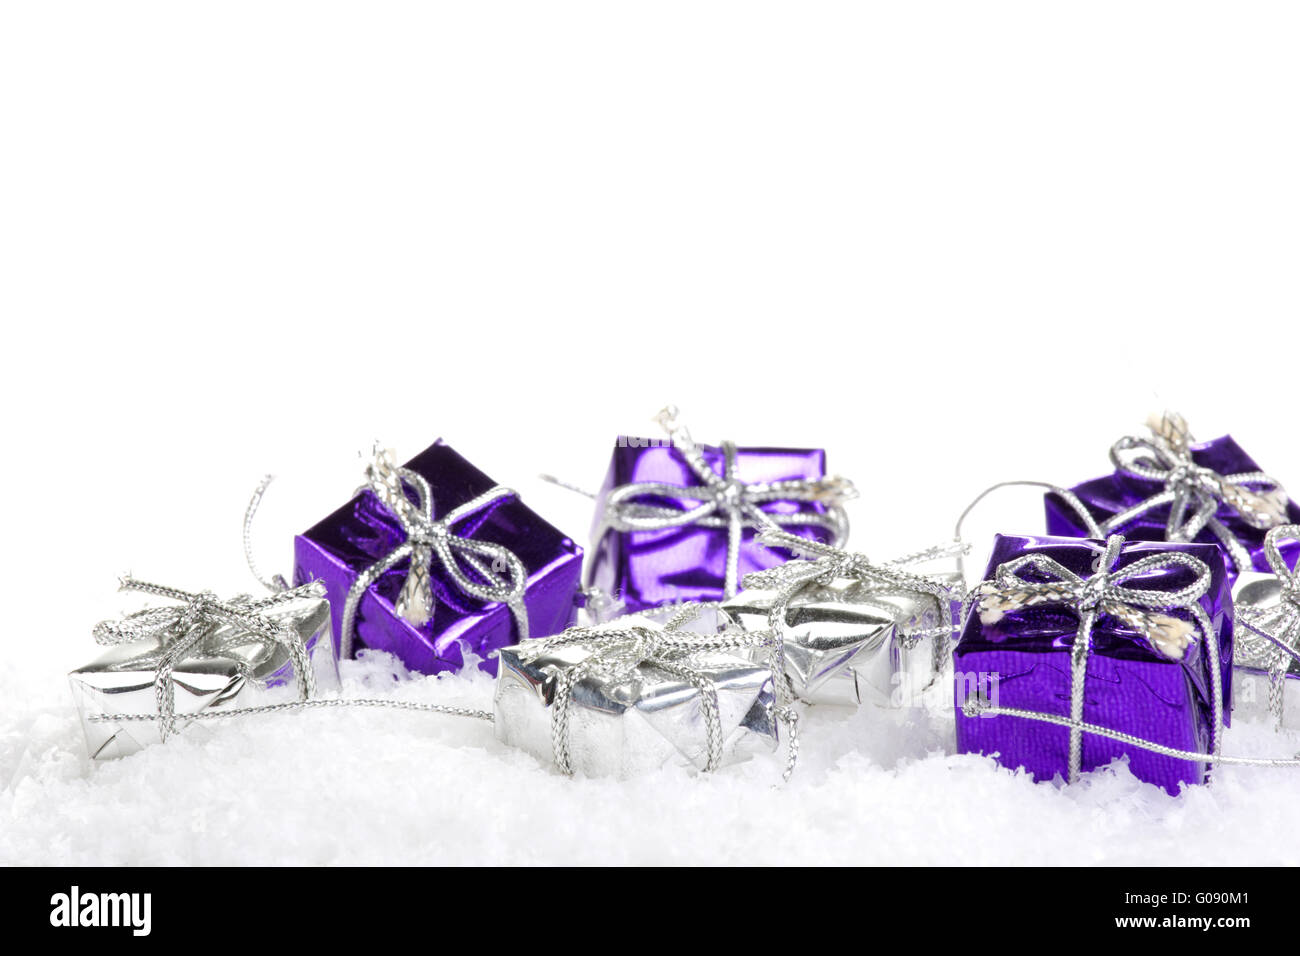 Presents purple and silver on artificial snow with Stock Photo